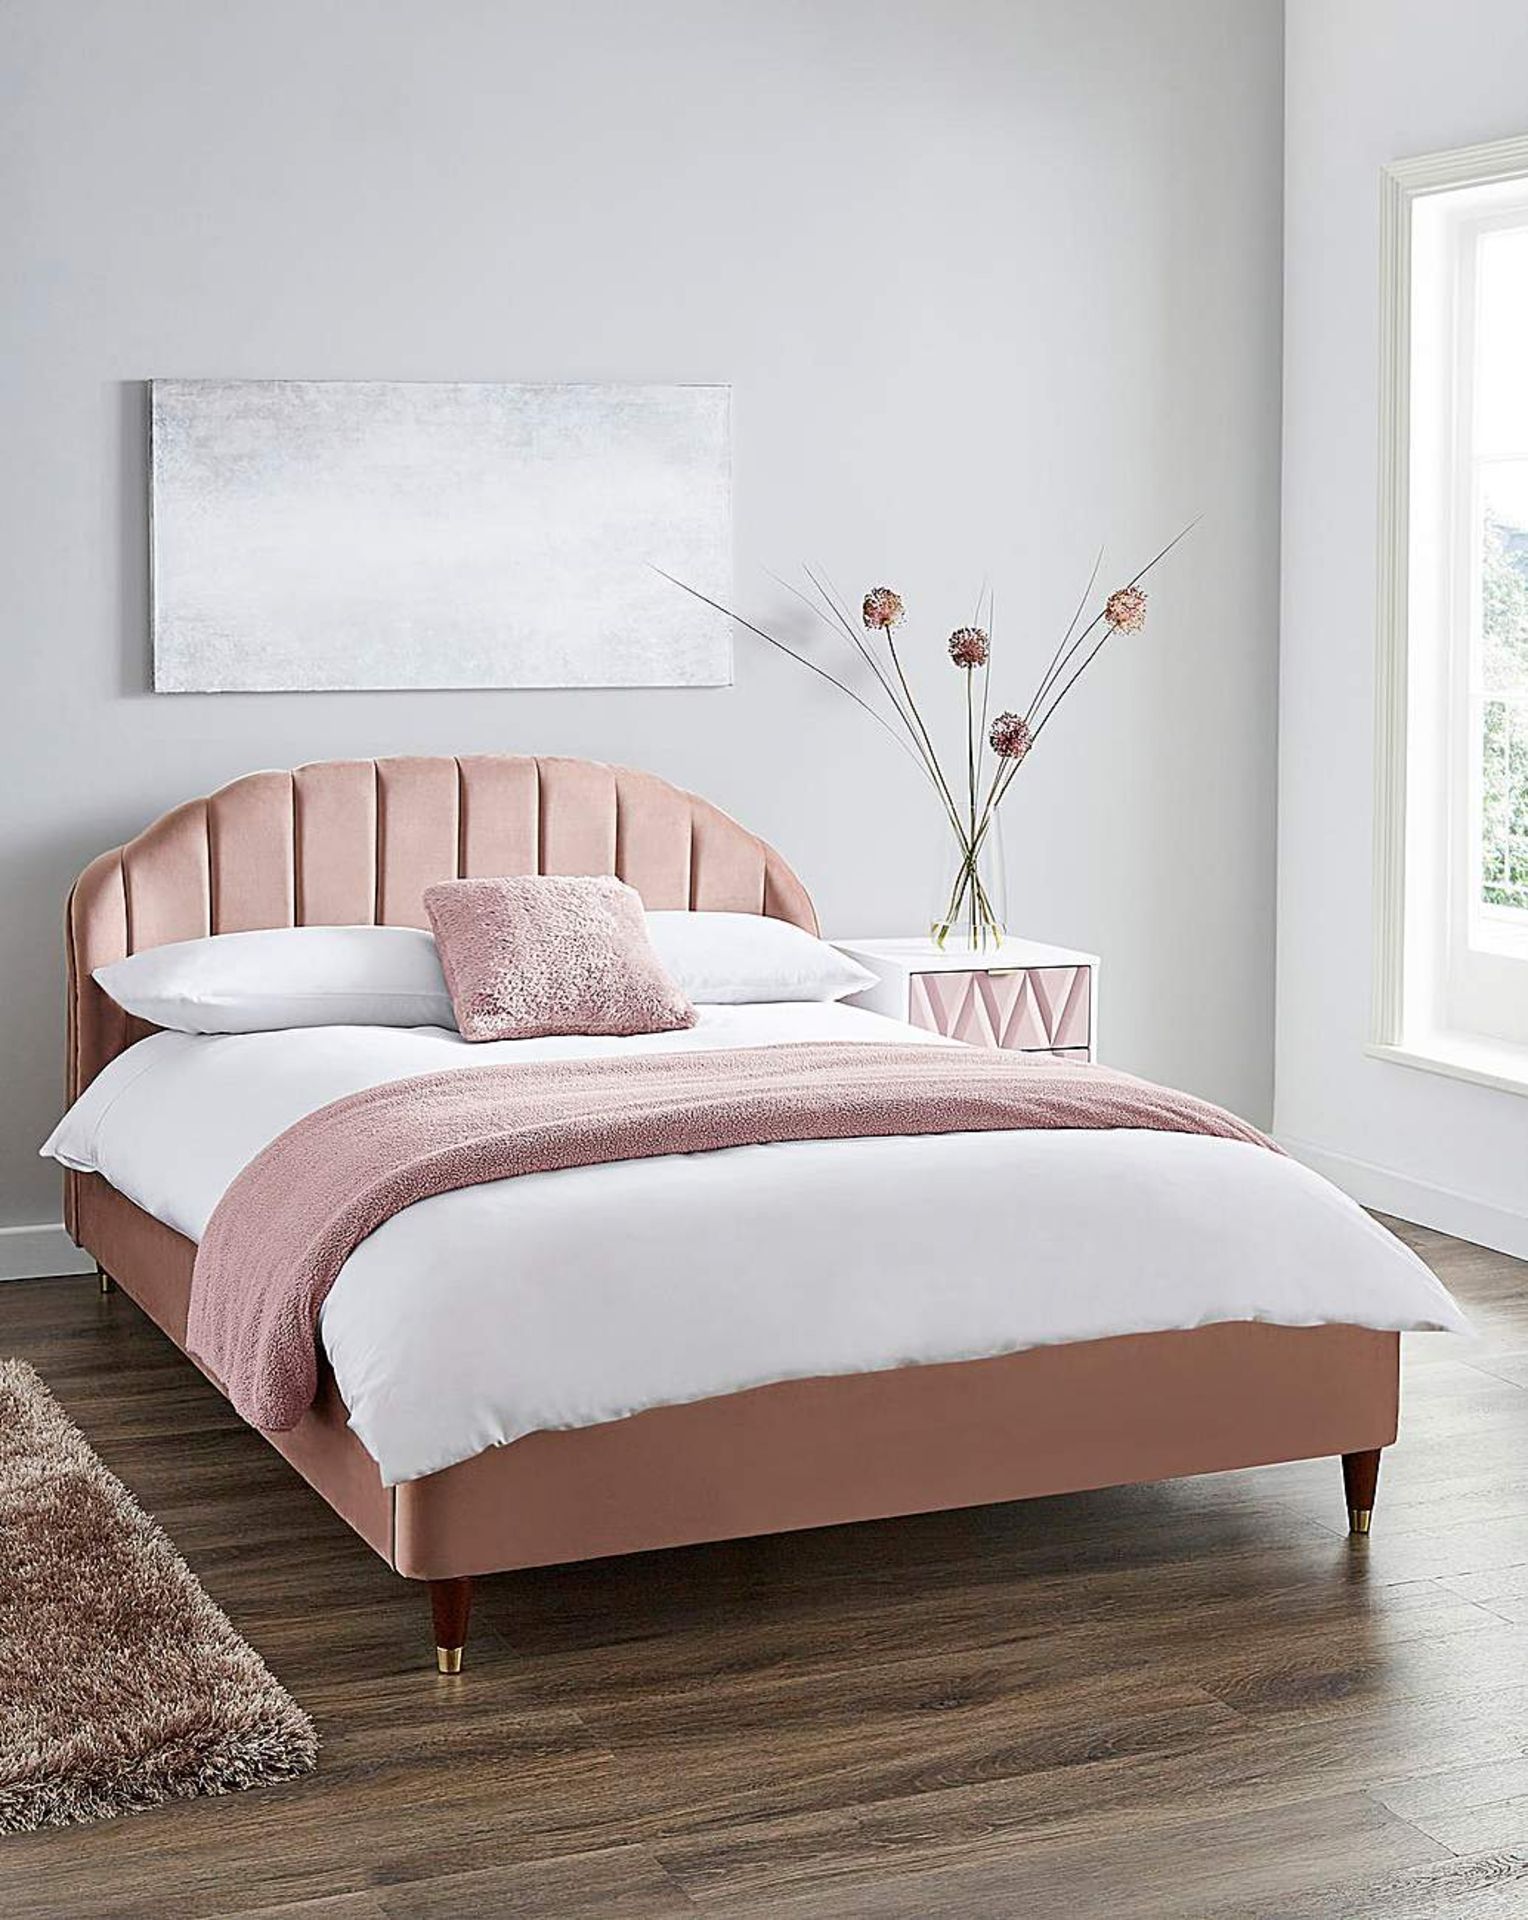 BRAND NEW CLARA Fabric KING Bed Frame. BLUSH. RRP £599 EACH. The Clara fabric bed frame features a